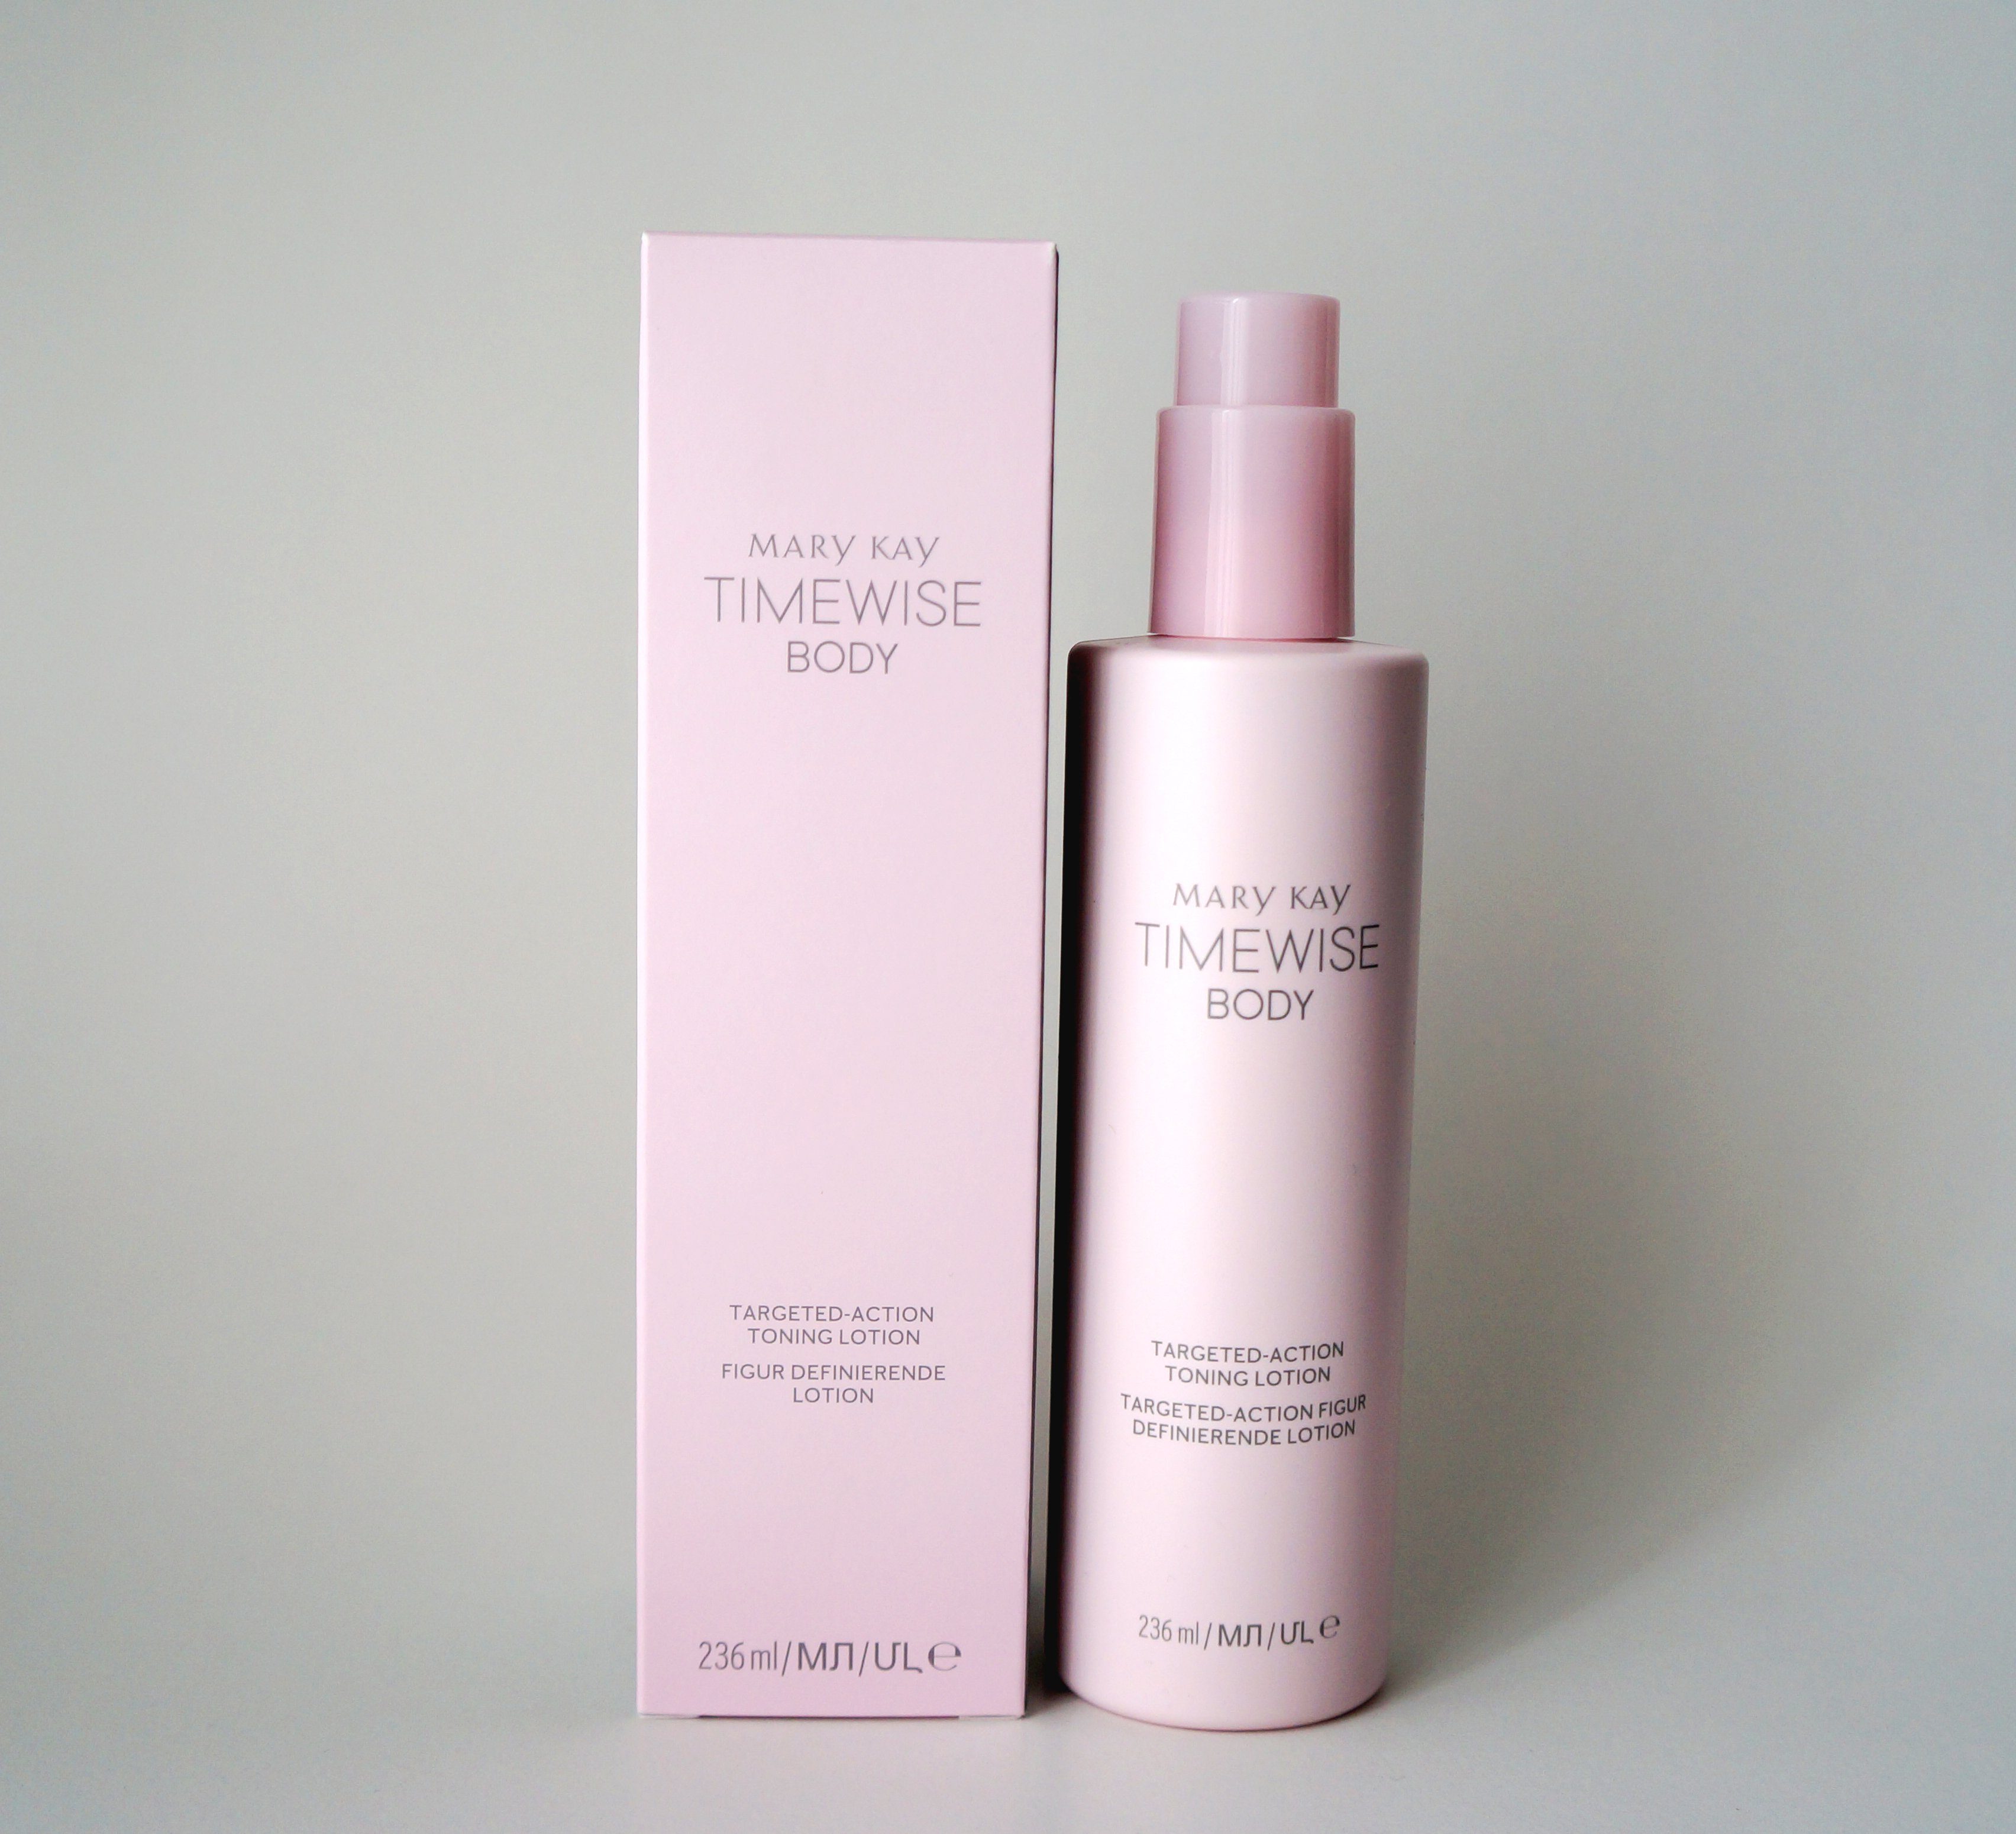 TimeWise 236ml Körperlotion Mary Lotion Kay Mary Kay Toning Targeted-Action Body